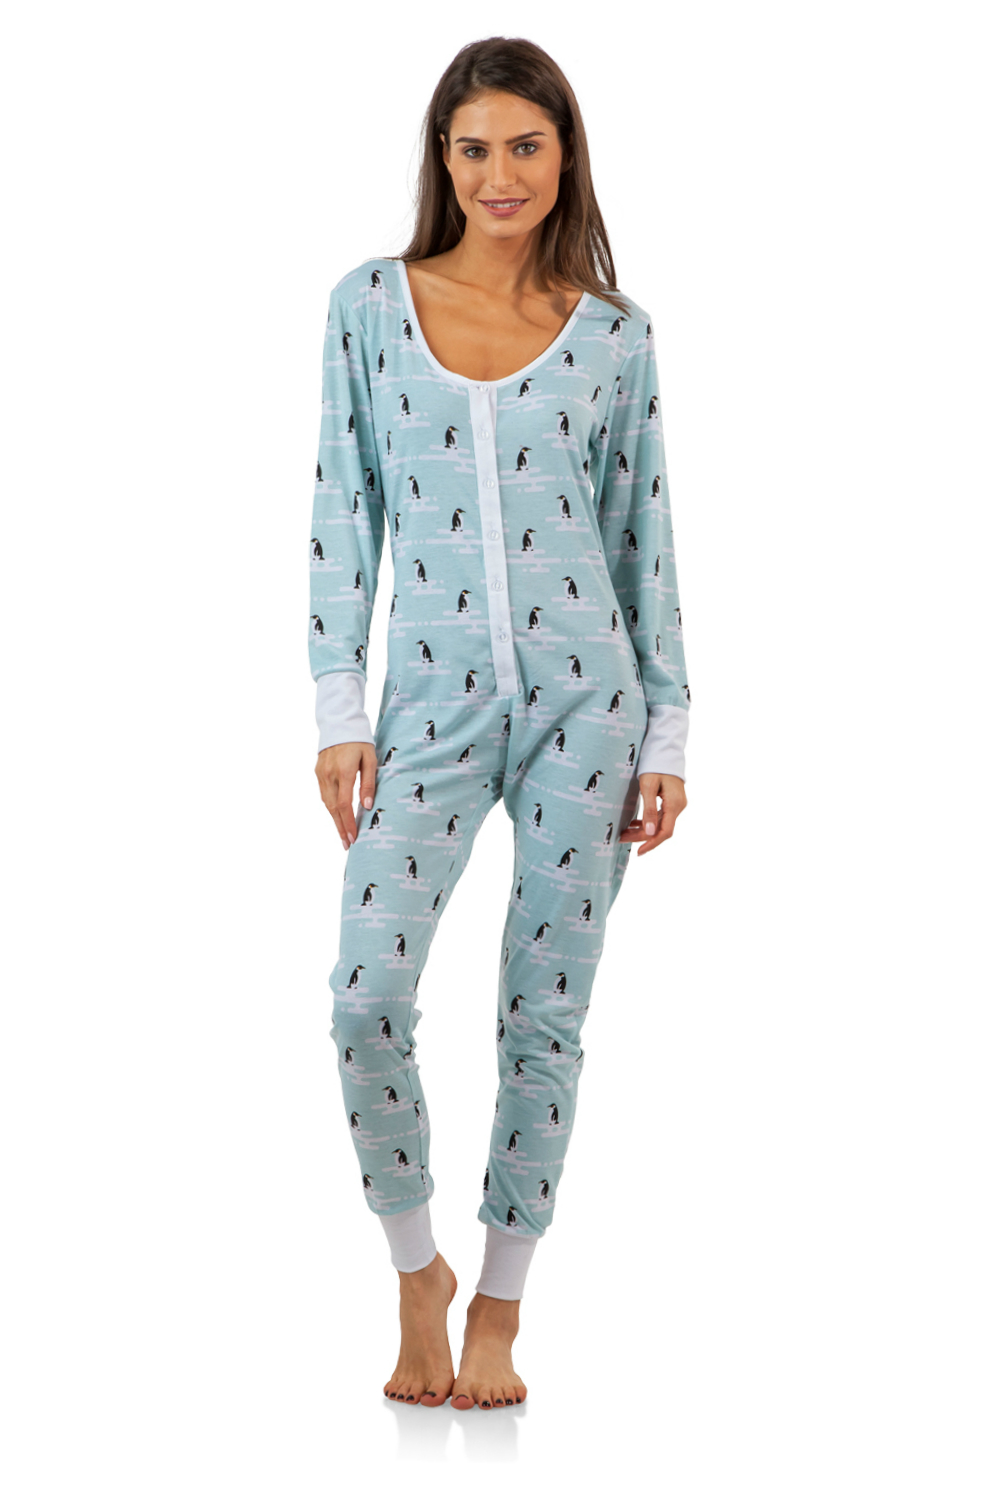 antenne Gom Grote waanidee BHPJ by BedHead Pajamas Women's Soft Knit Button Front One Piece Pajama  Jumpsuit - Snow Penguin BH10134S7188